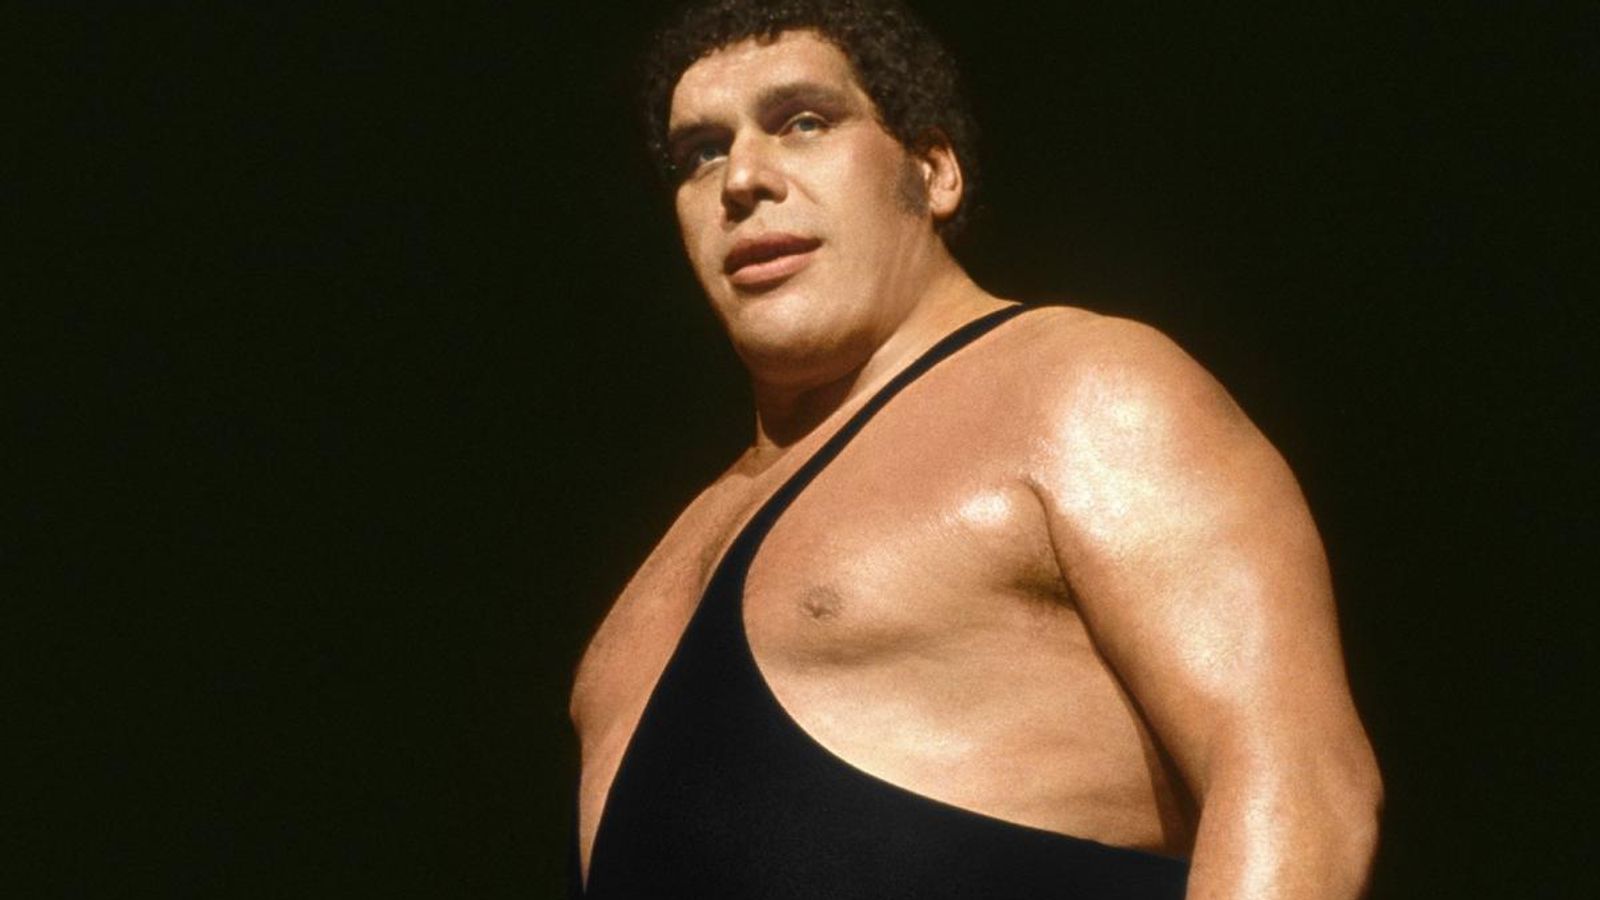 One of the nicknames Andre the Giant had during his utterly fascinating lif...